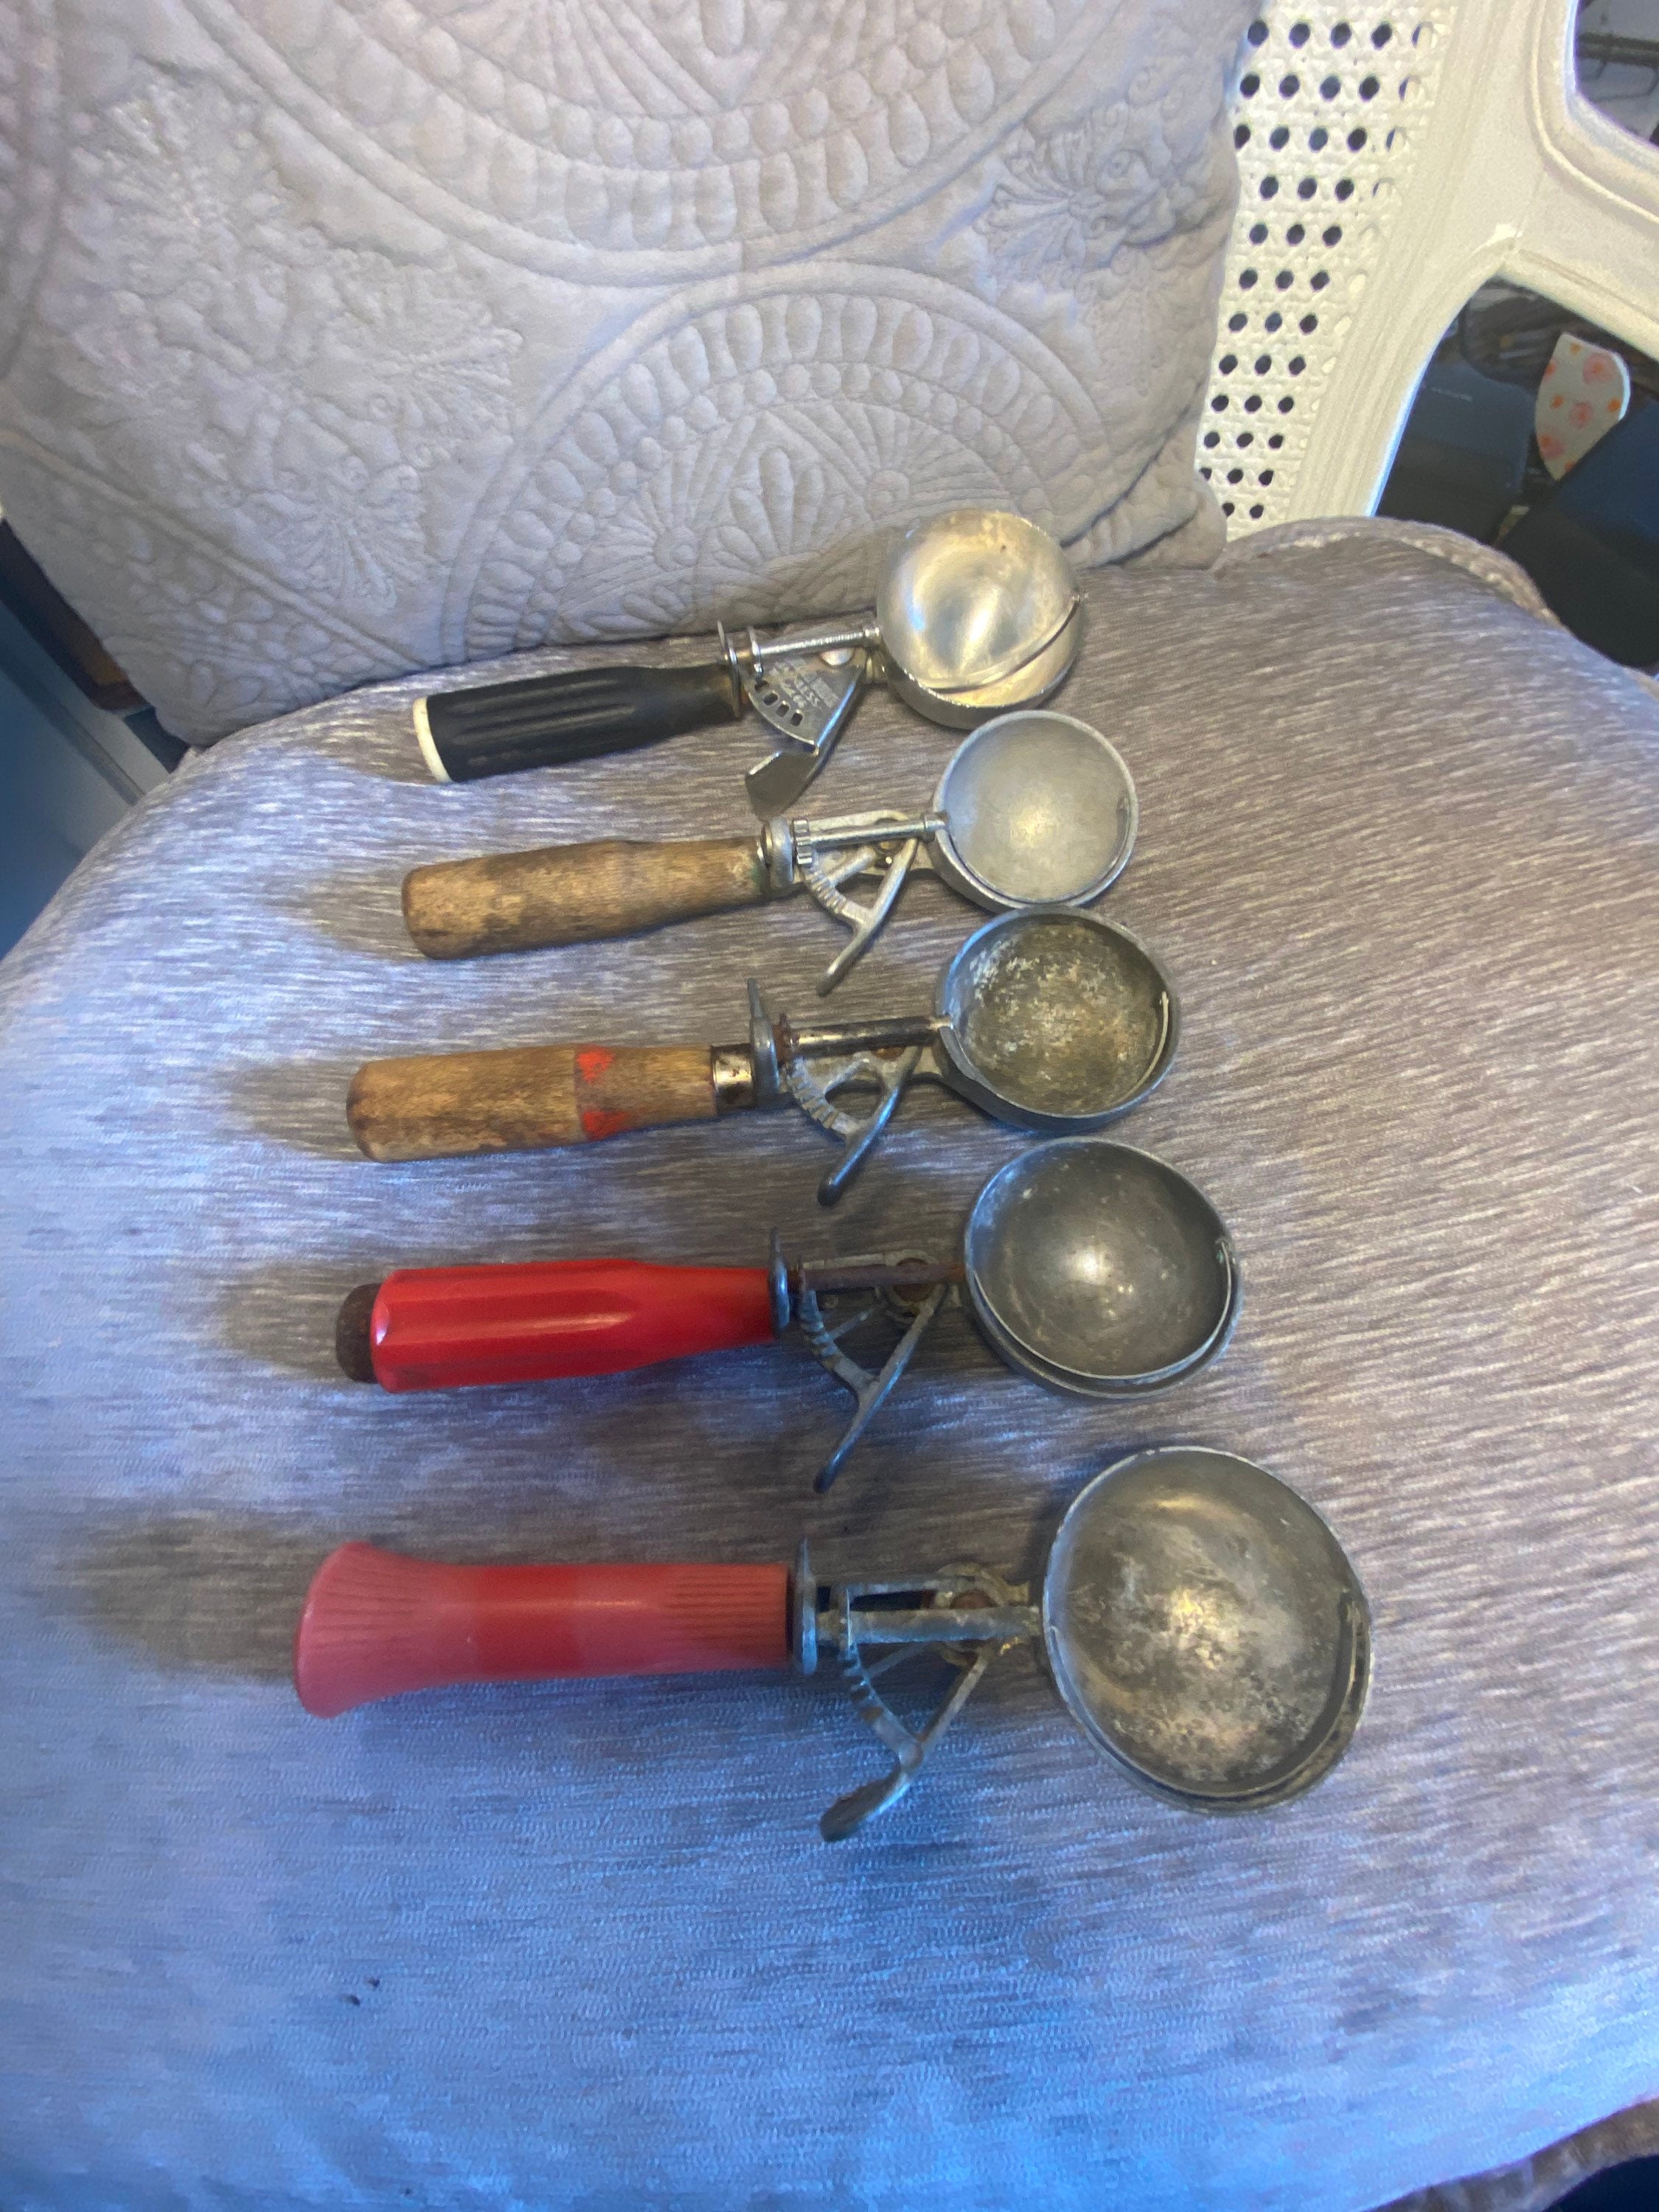 3 Vintage Ice Cream Scoops Pampered Chef, Kitchen Aid, Aluminum Scoop Lot